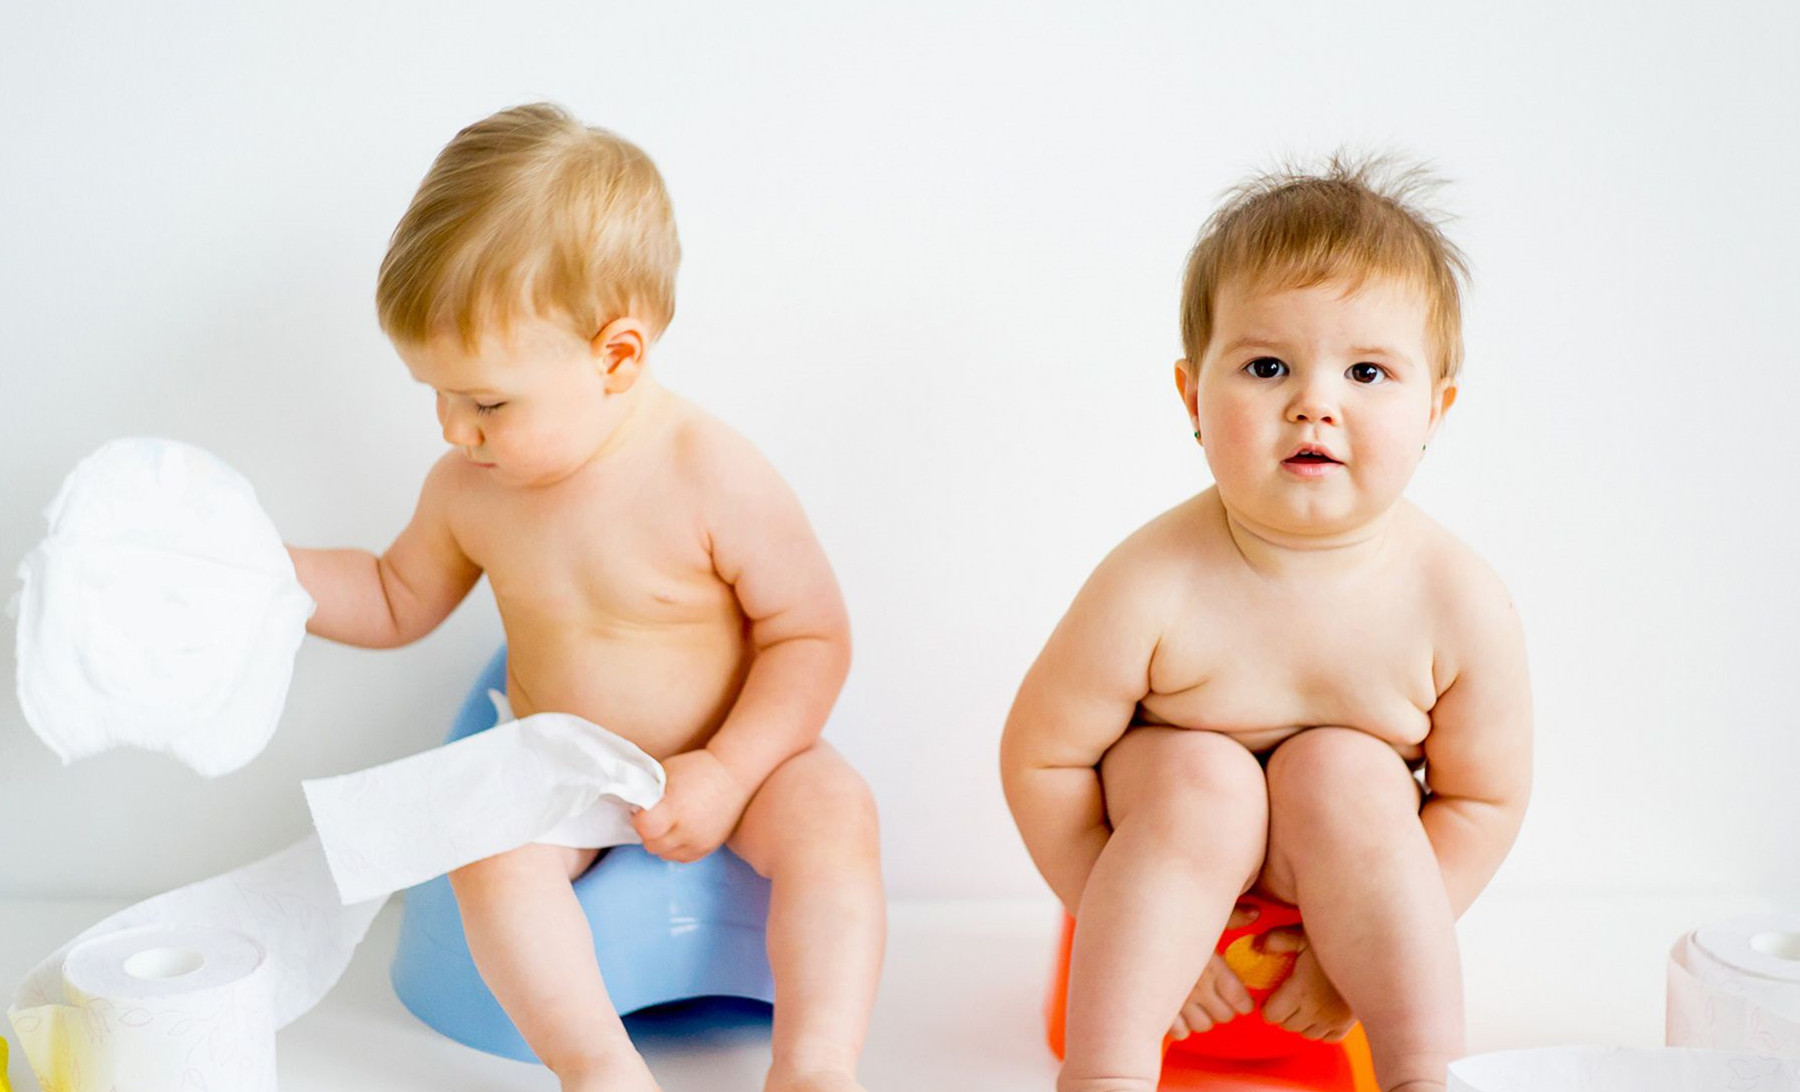 When your child should stop using diapers?